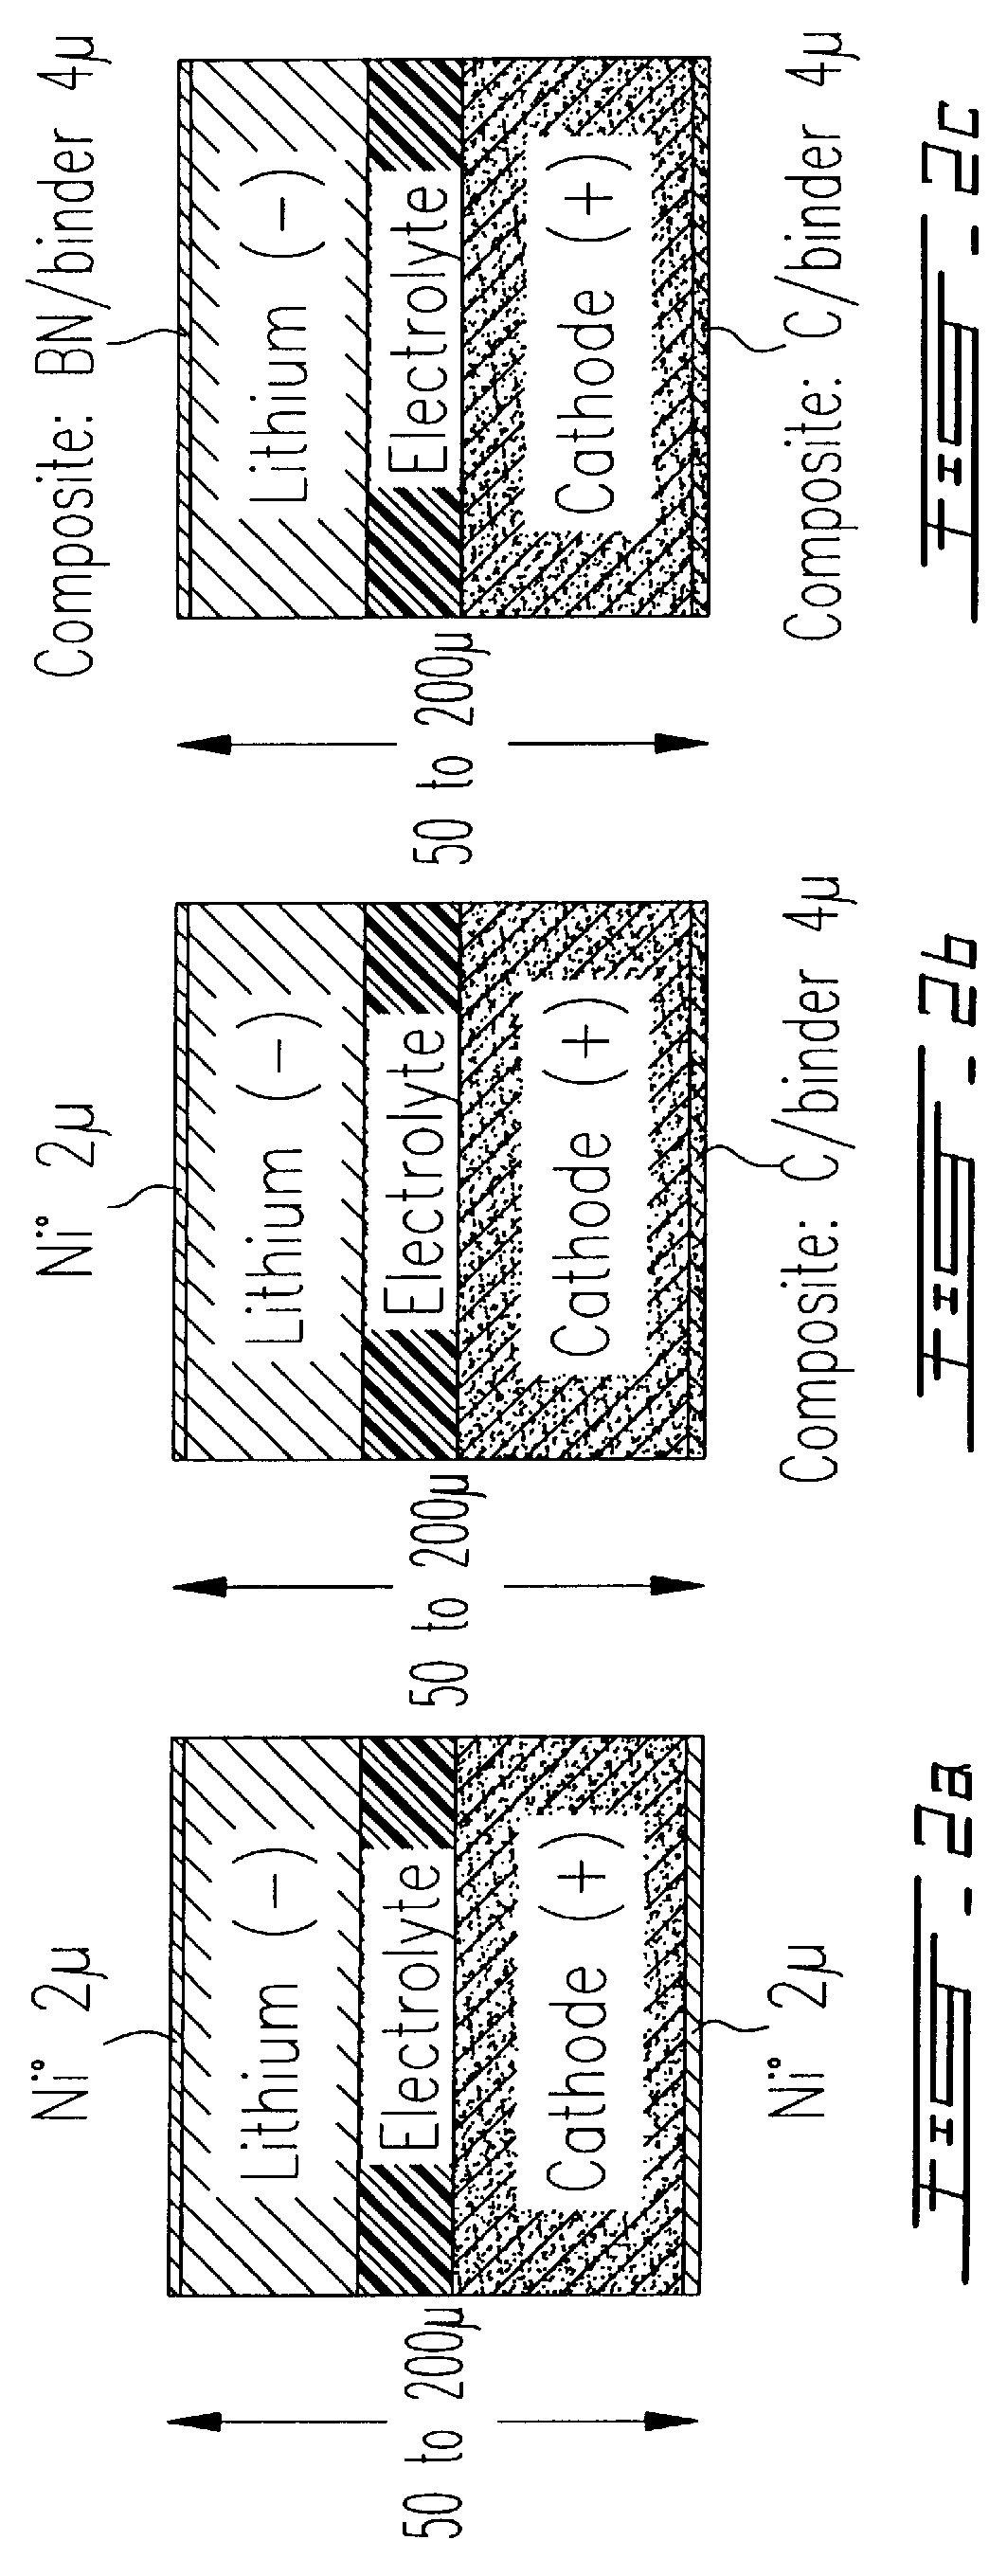 Ultra thin solid state lithium batteries and process of preparing same